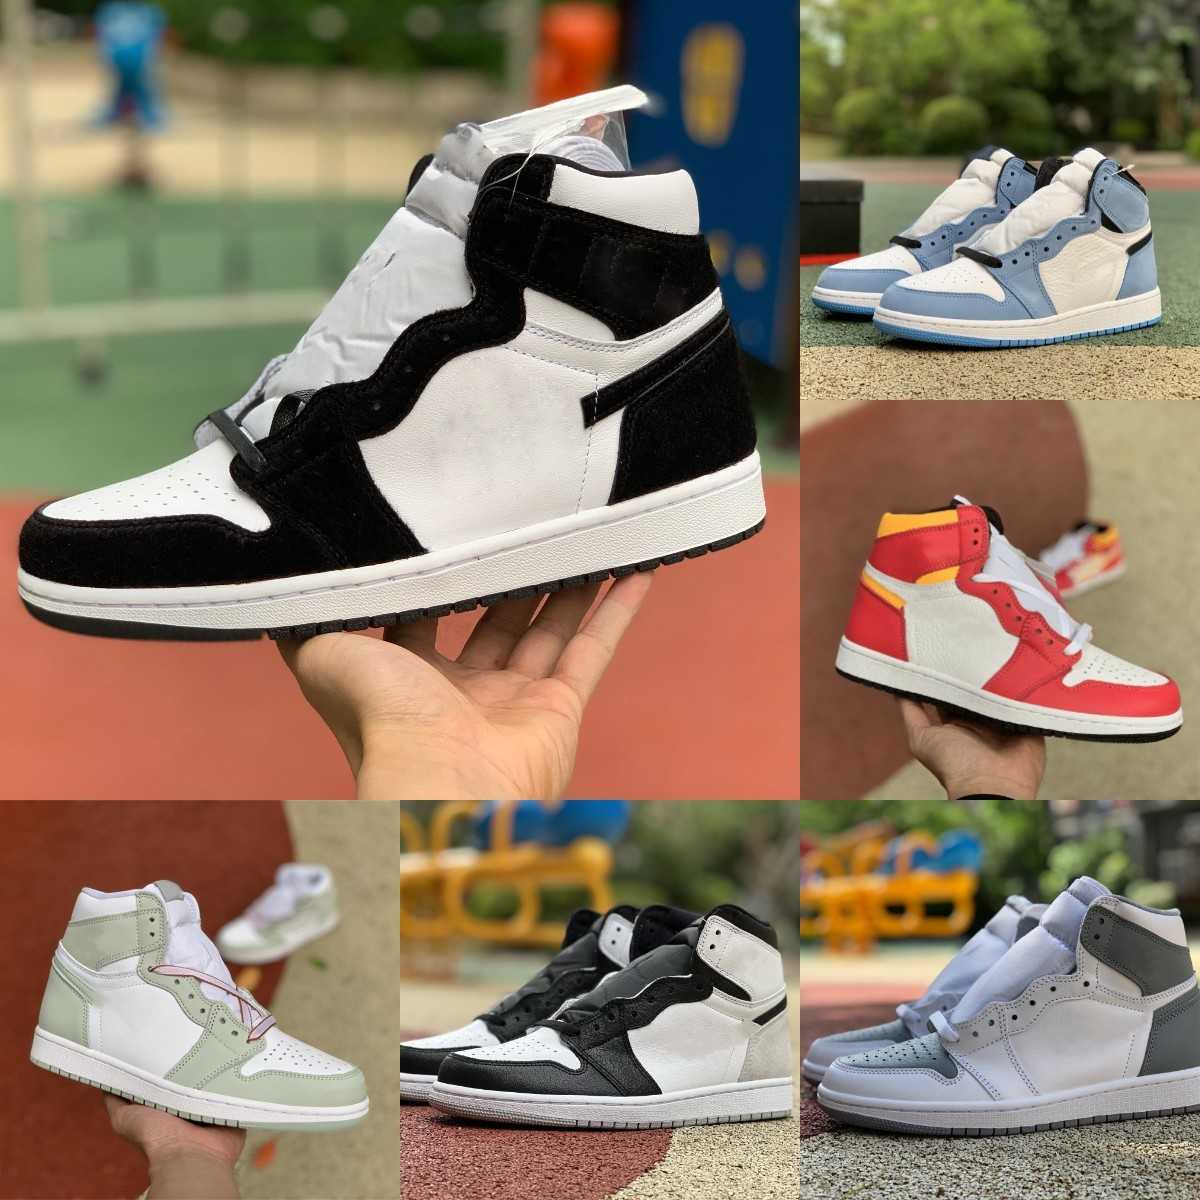 2023 Jumpman 1 1s High Sports Basketball Shoes Mens Women Stealth Stage Haze Bio Hack Rebellionaire Military University Blue New Love Mark Mocka Trainers Sneakers S5